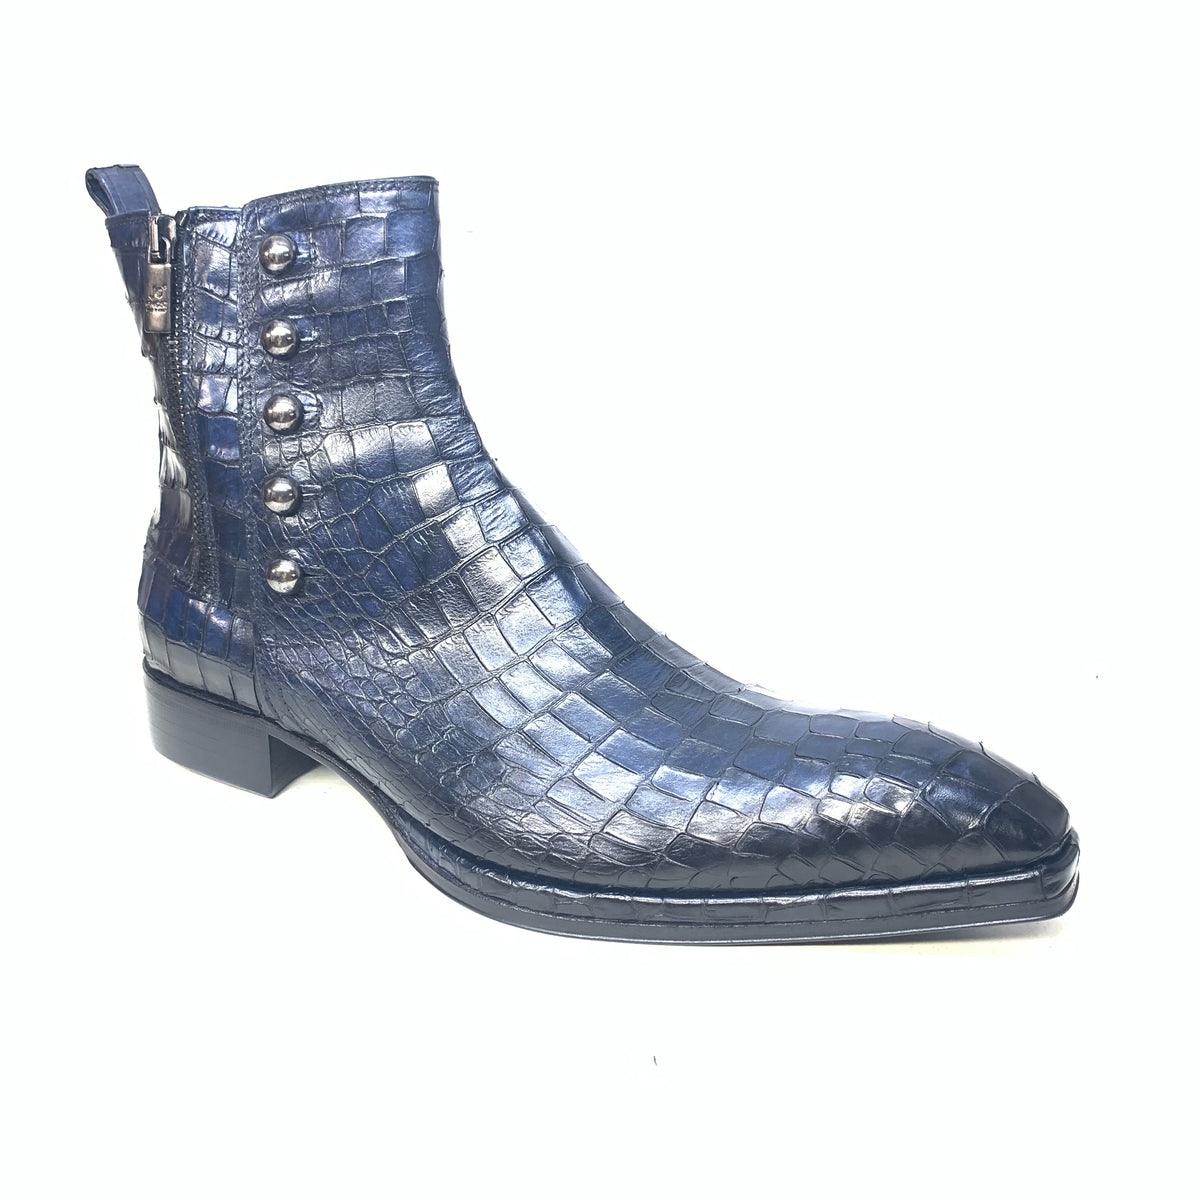 Jo Ghost Deep Navy Alligator Ankle Boots - Dudes Boutique